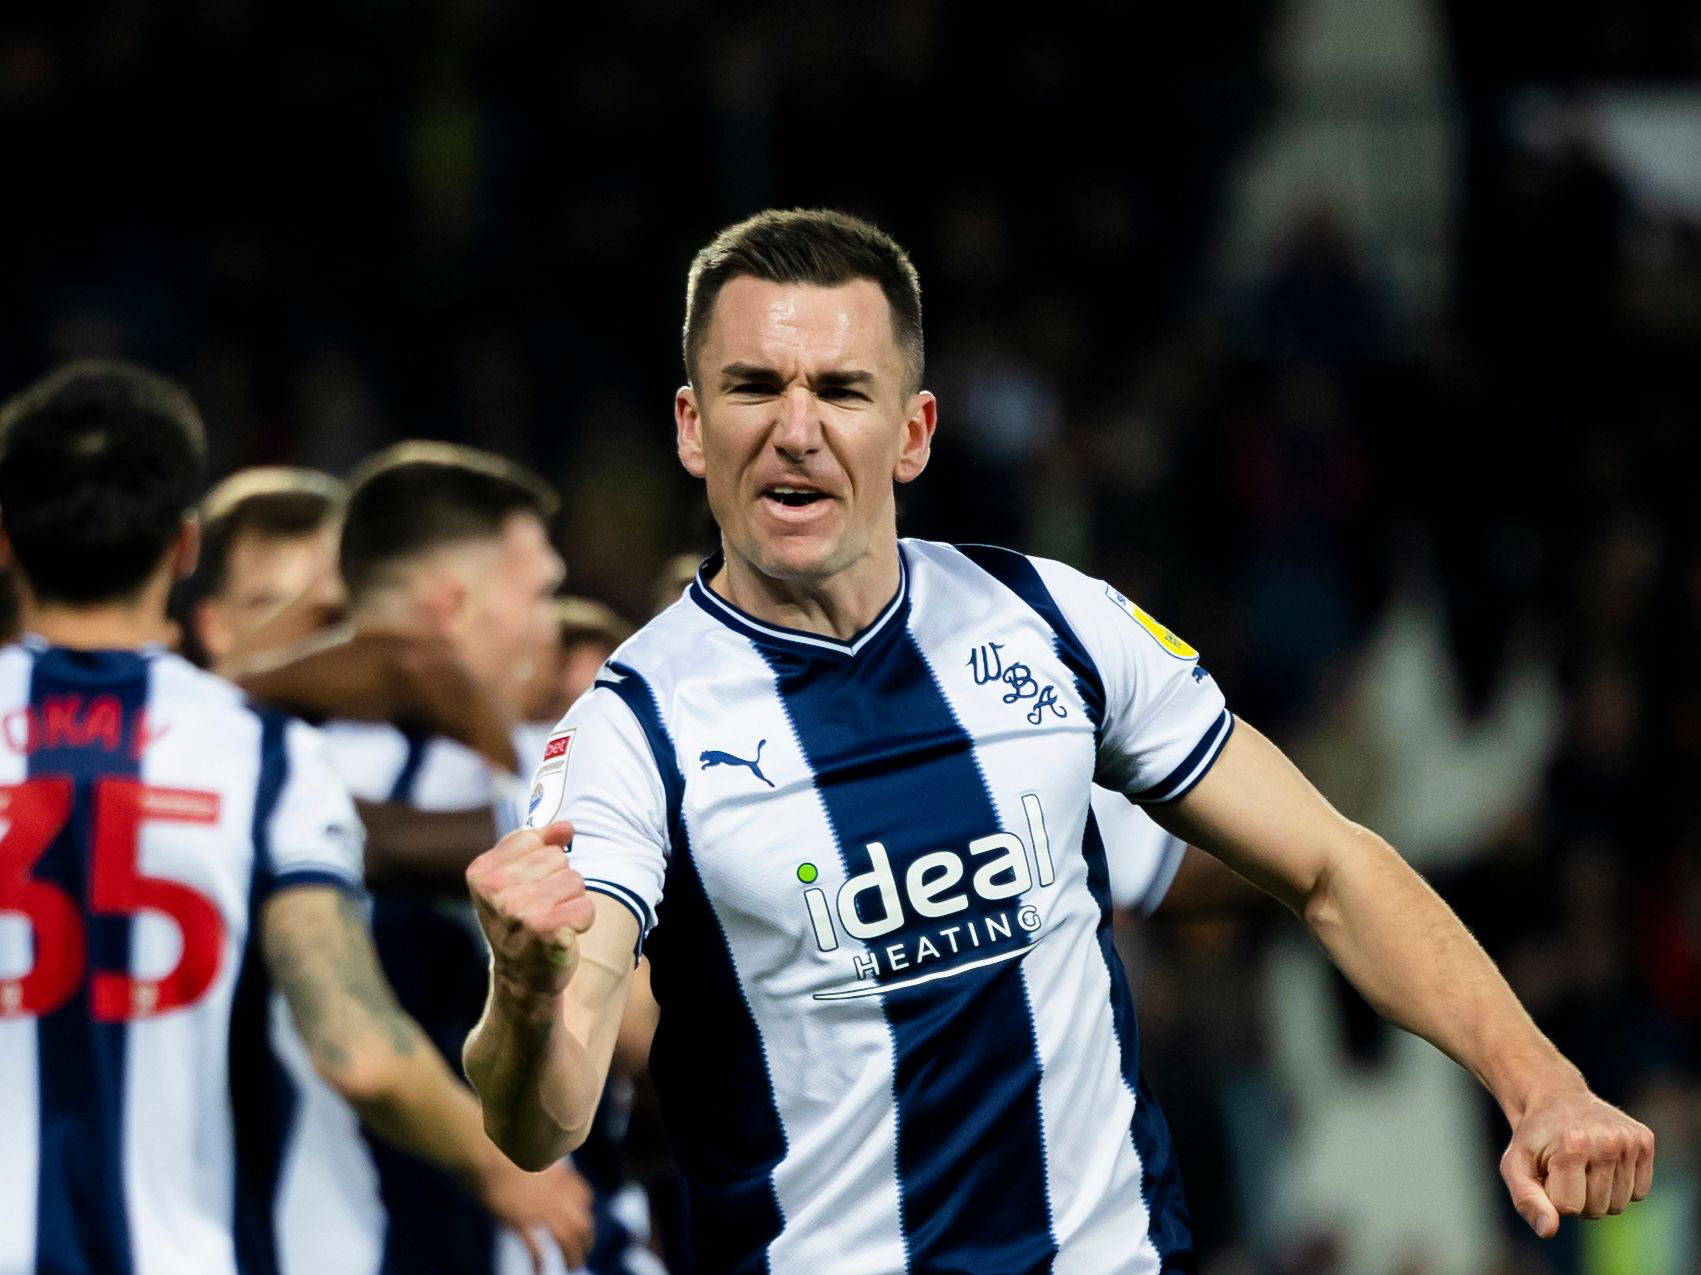 An image of Jed Wallace celebrating against Coventry